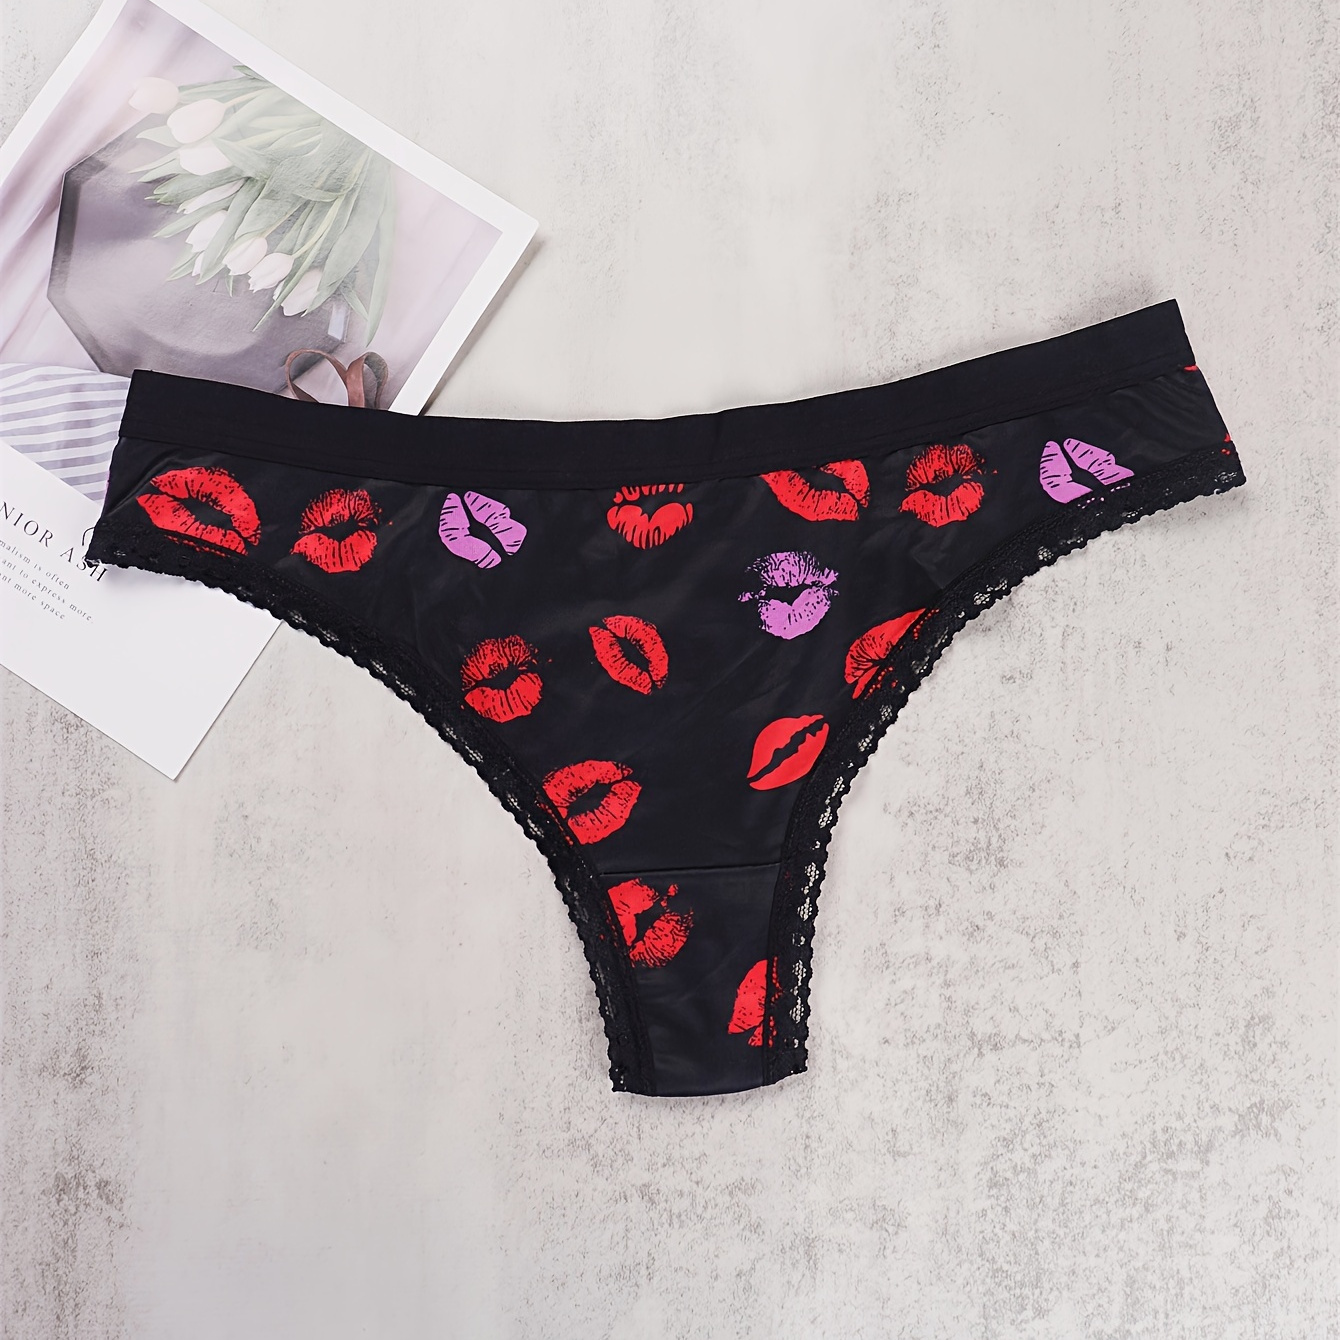 

Sexy Red Lips Print Thongs, Seamless Low Waist Contrast Lace Stretchy Panties, Women's Lingerie & Underwear